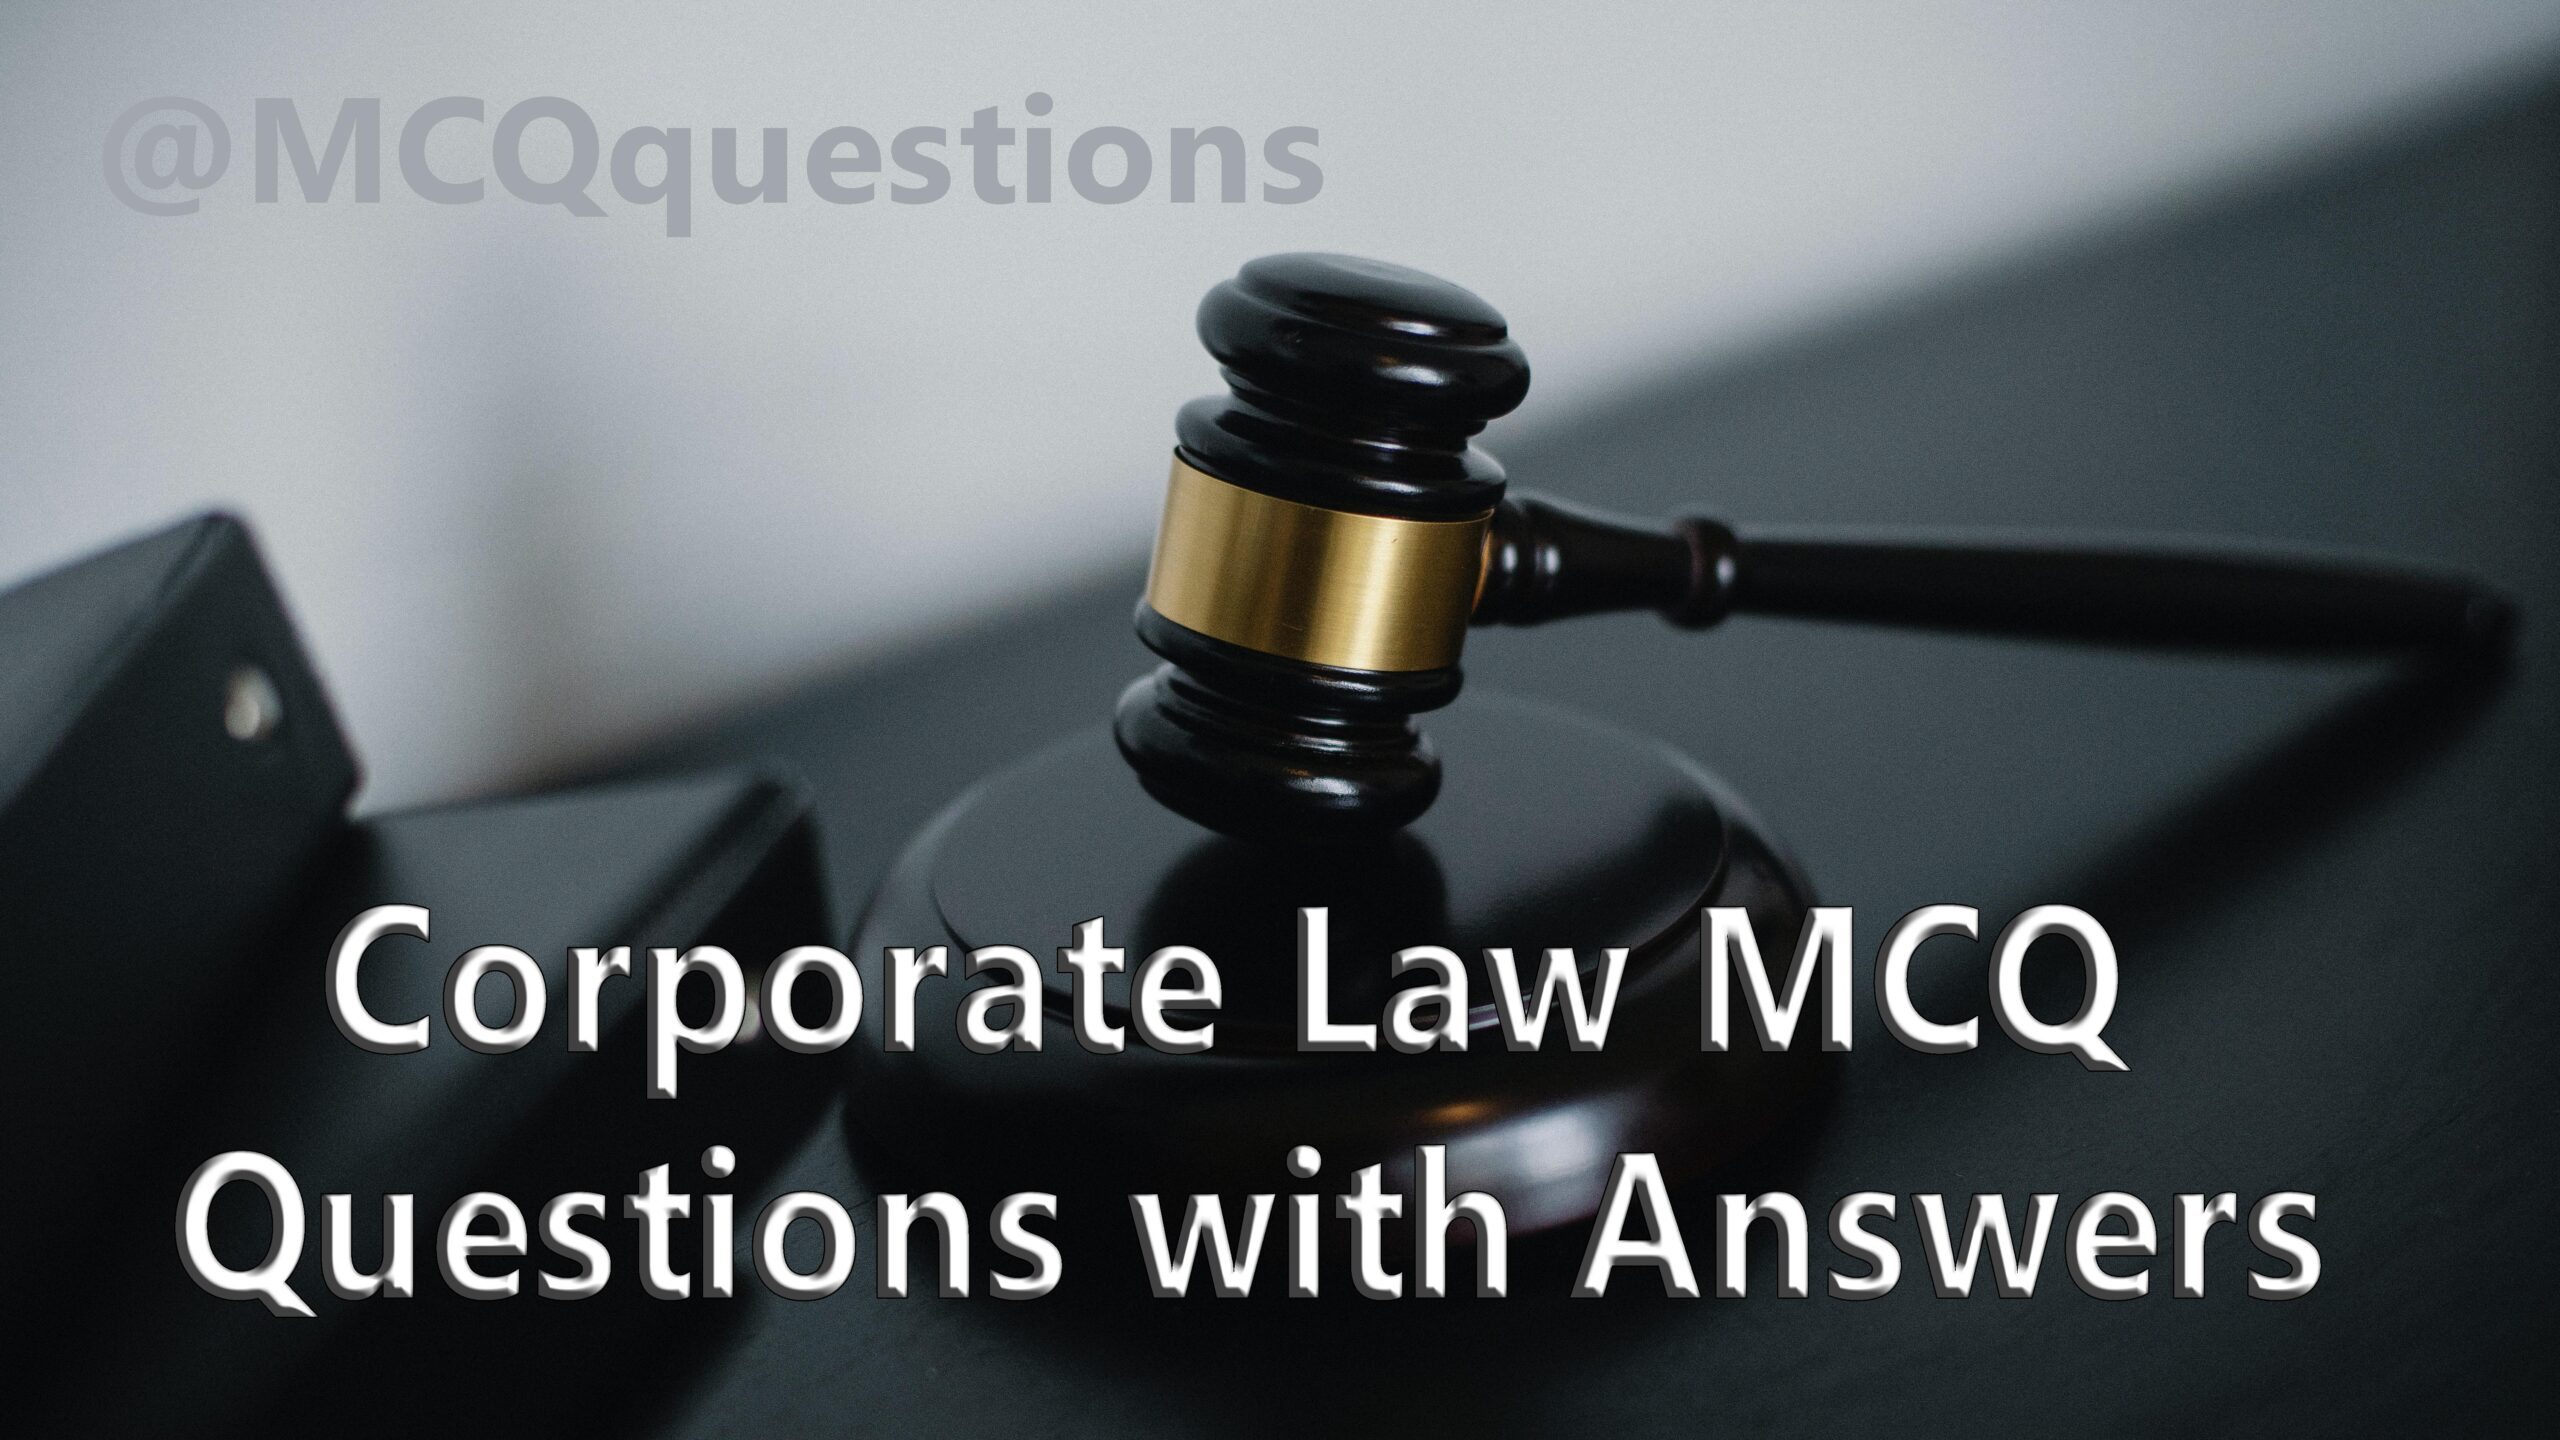 Corporate Law MCQ Questions with Answers